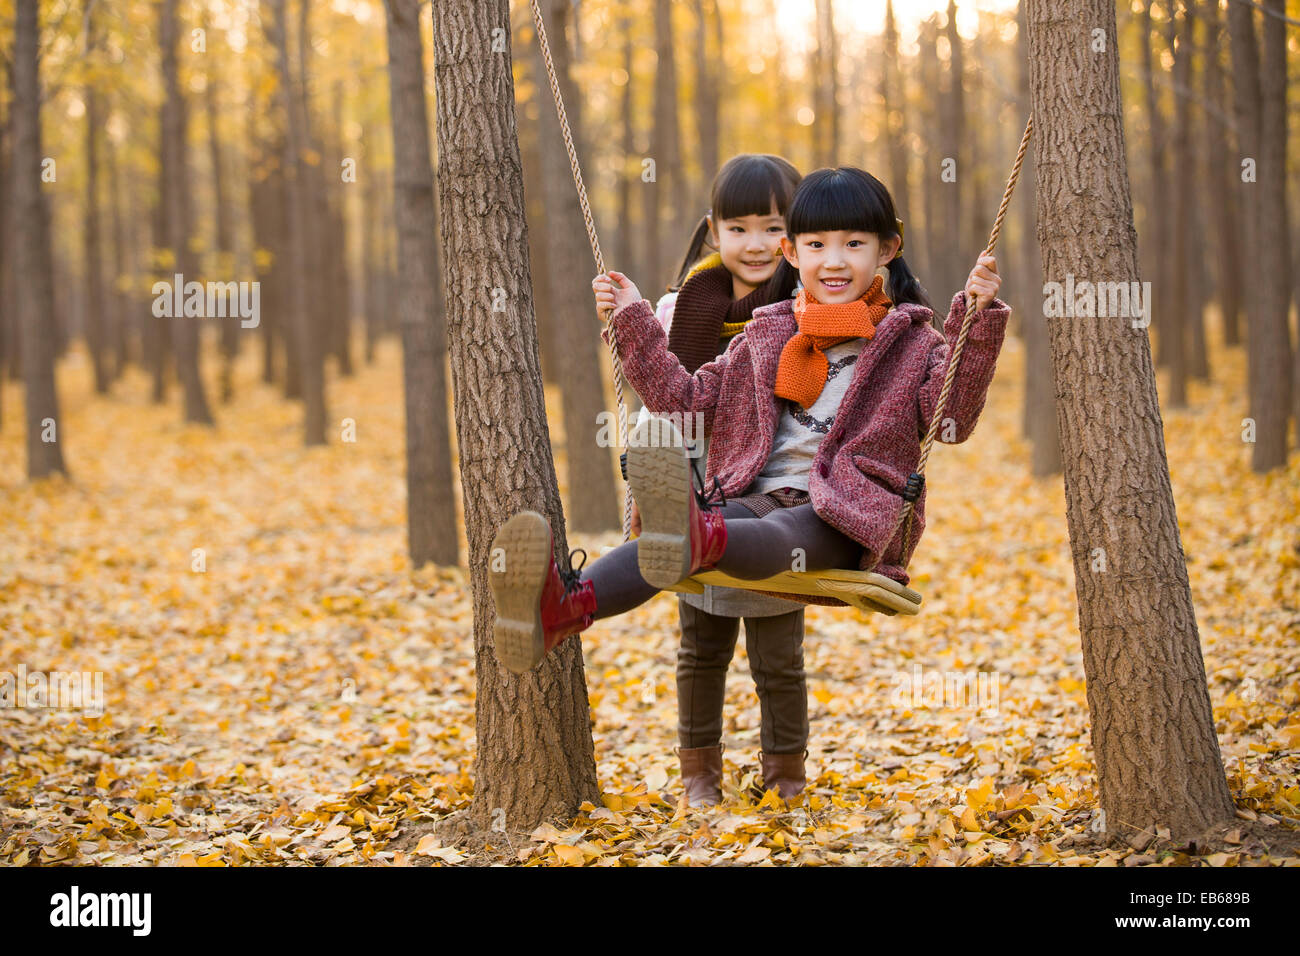 Little girl pushing her sister on a swing in autumn woods Stock Photo